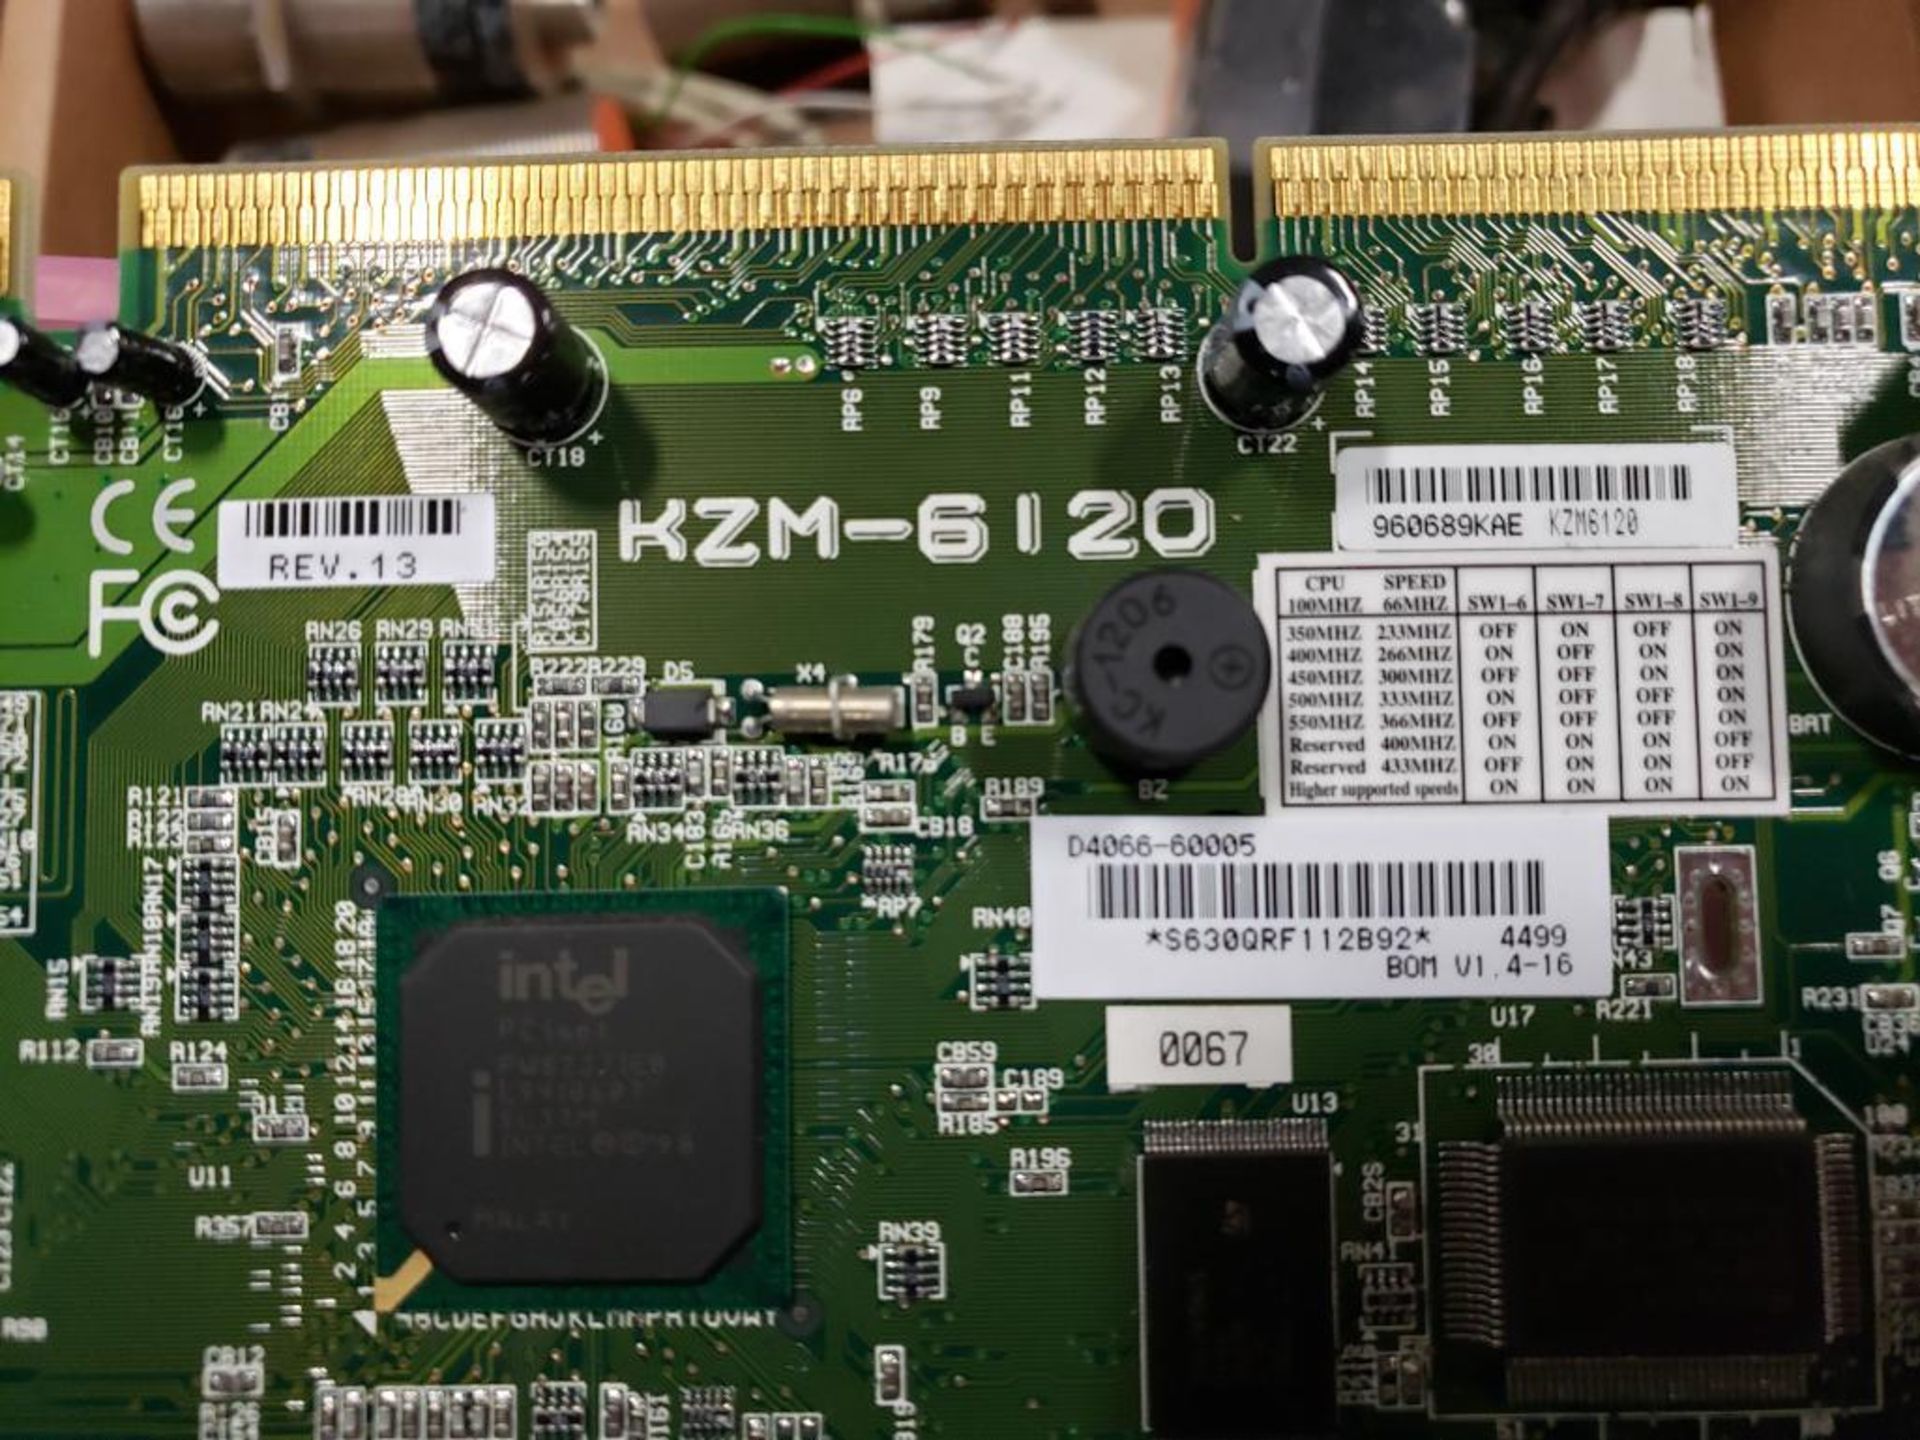 Qty 3 - HP KZM-6120 mother board card. D4066-60005. - Image 4 of 7